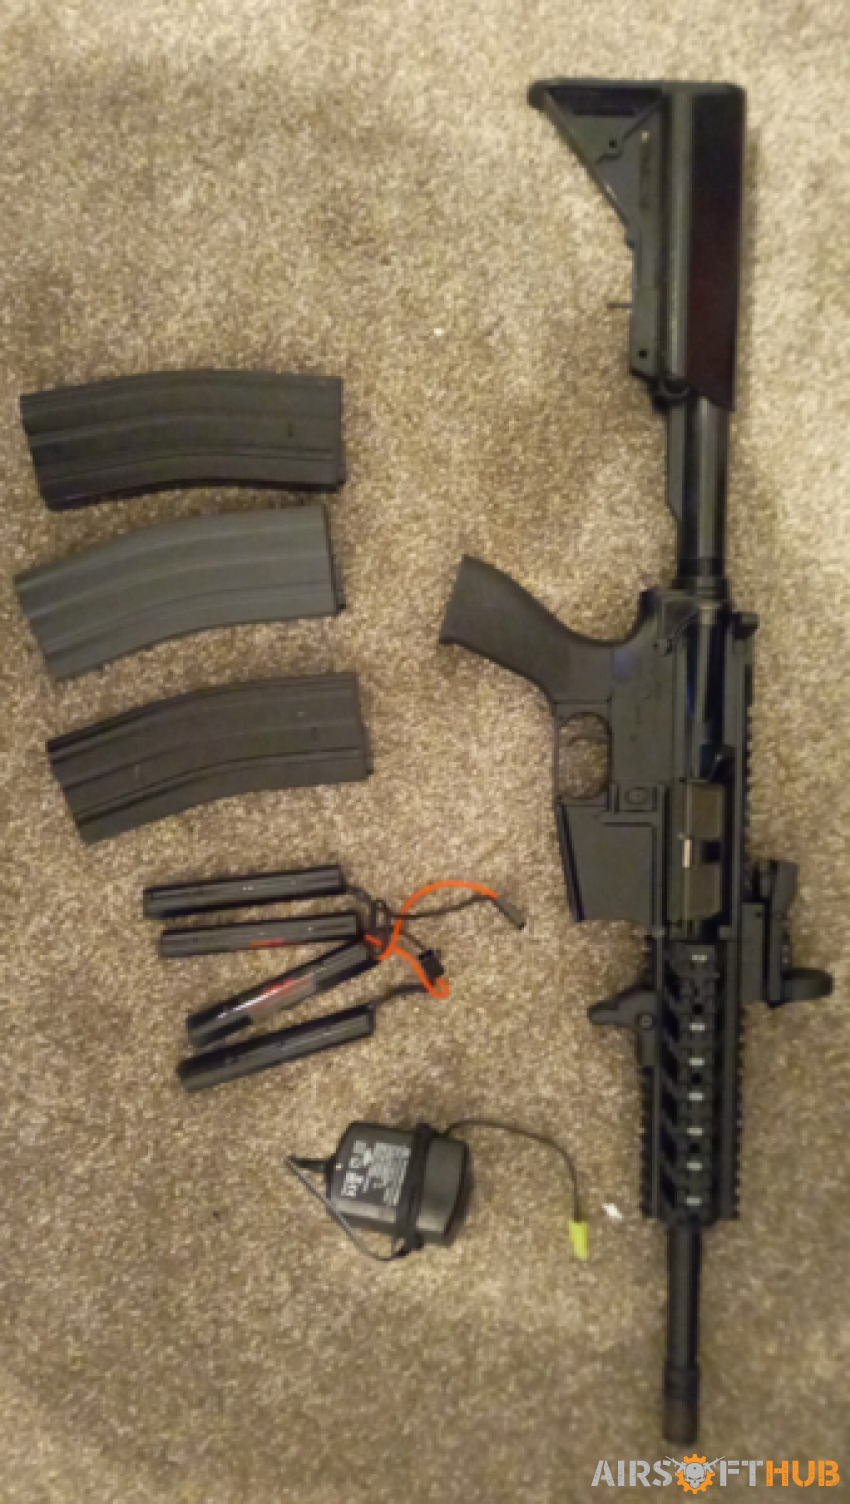 G&G cm16 - Used airsoft equipment